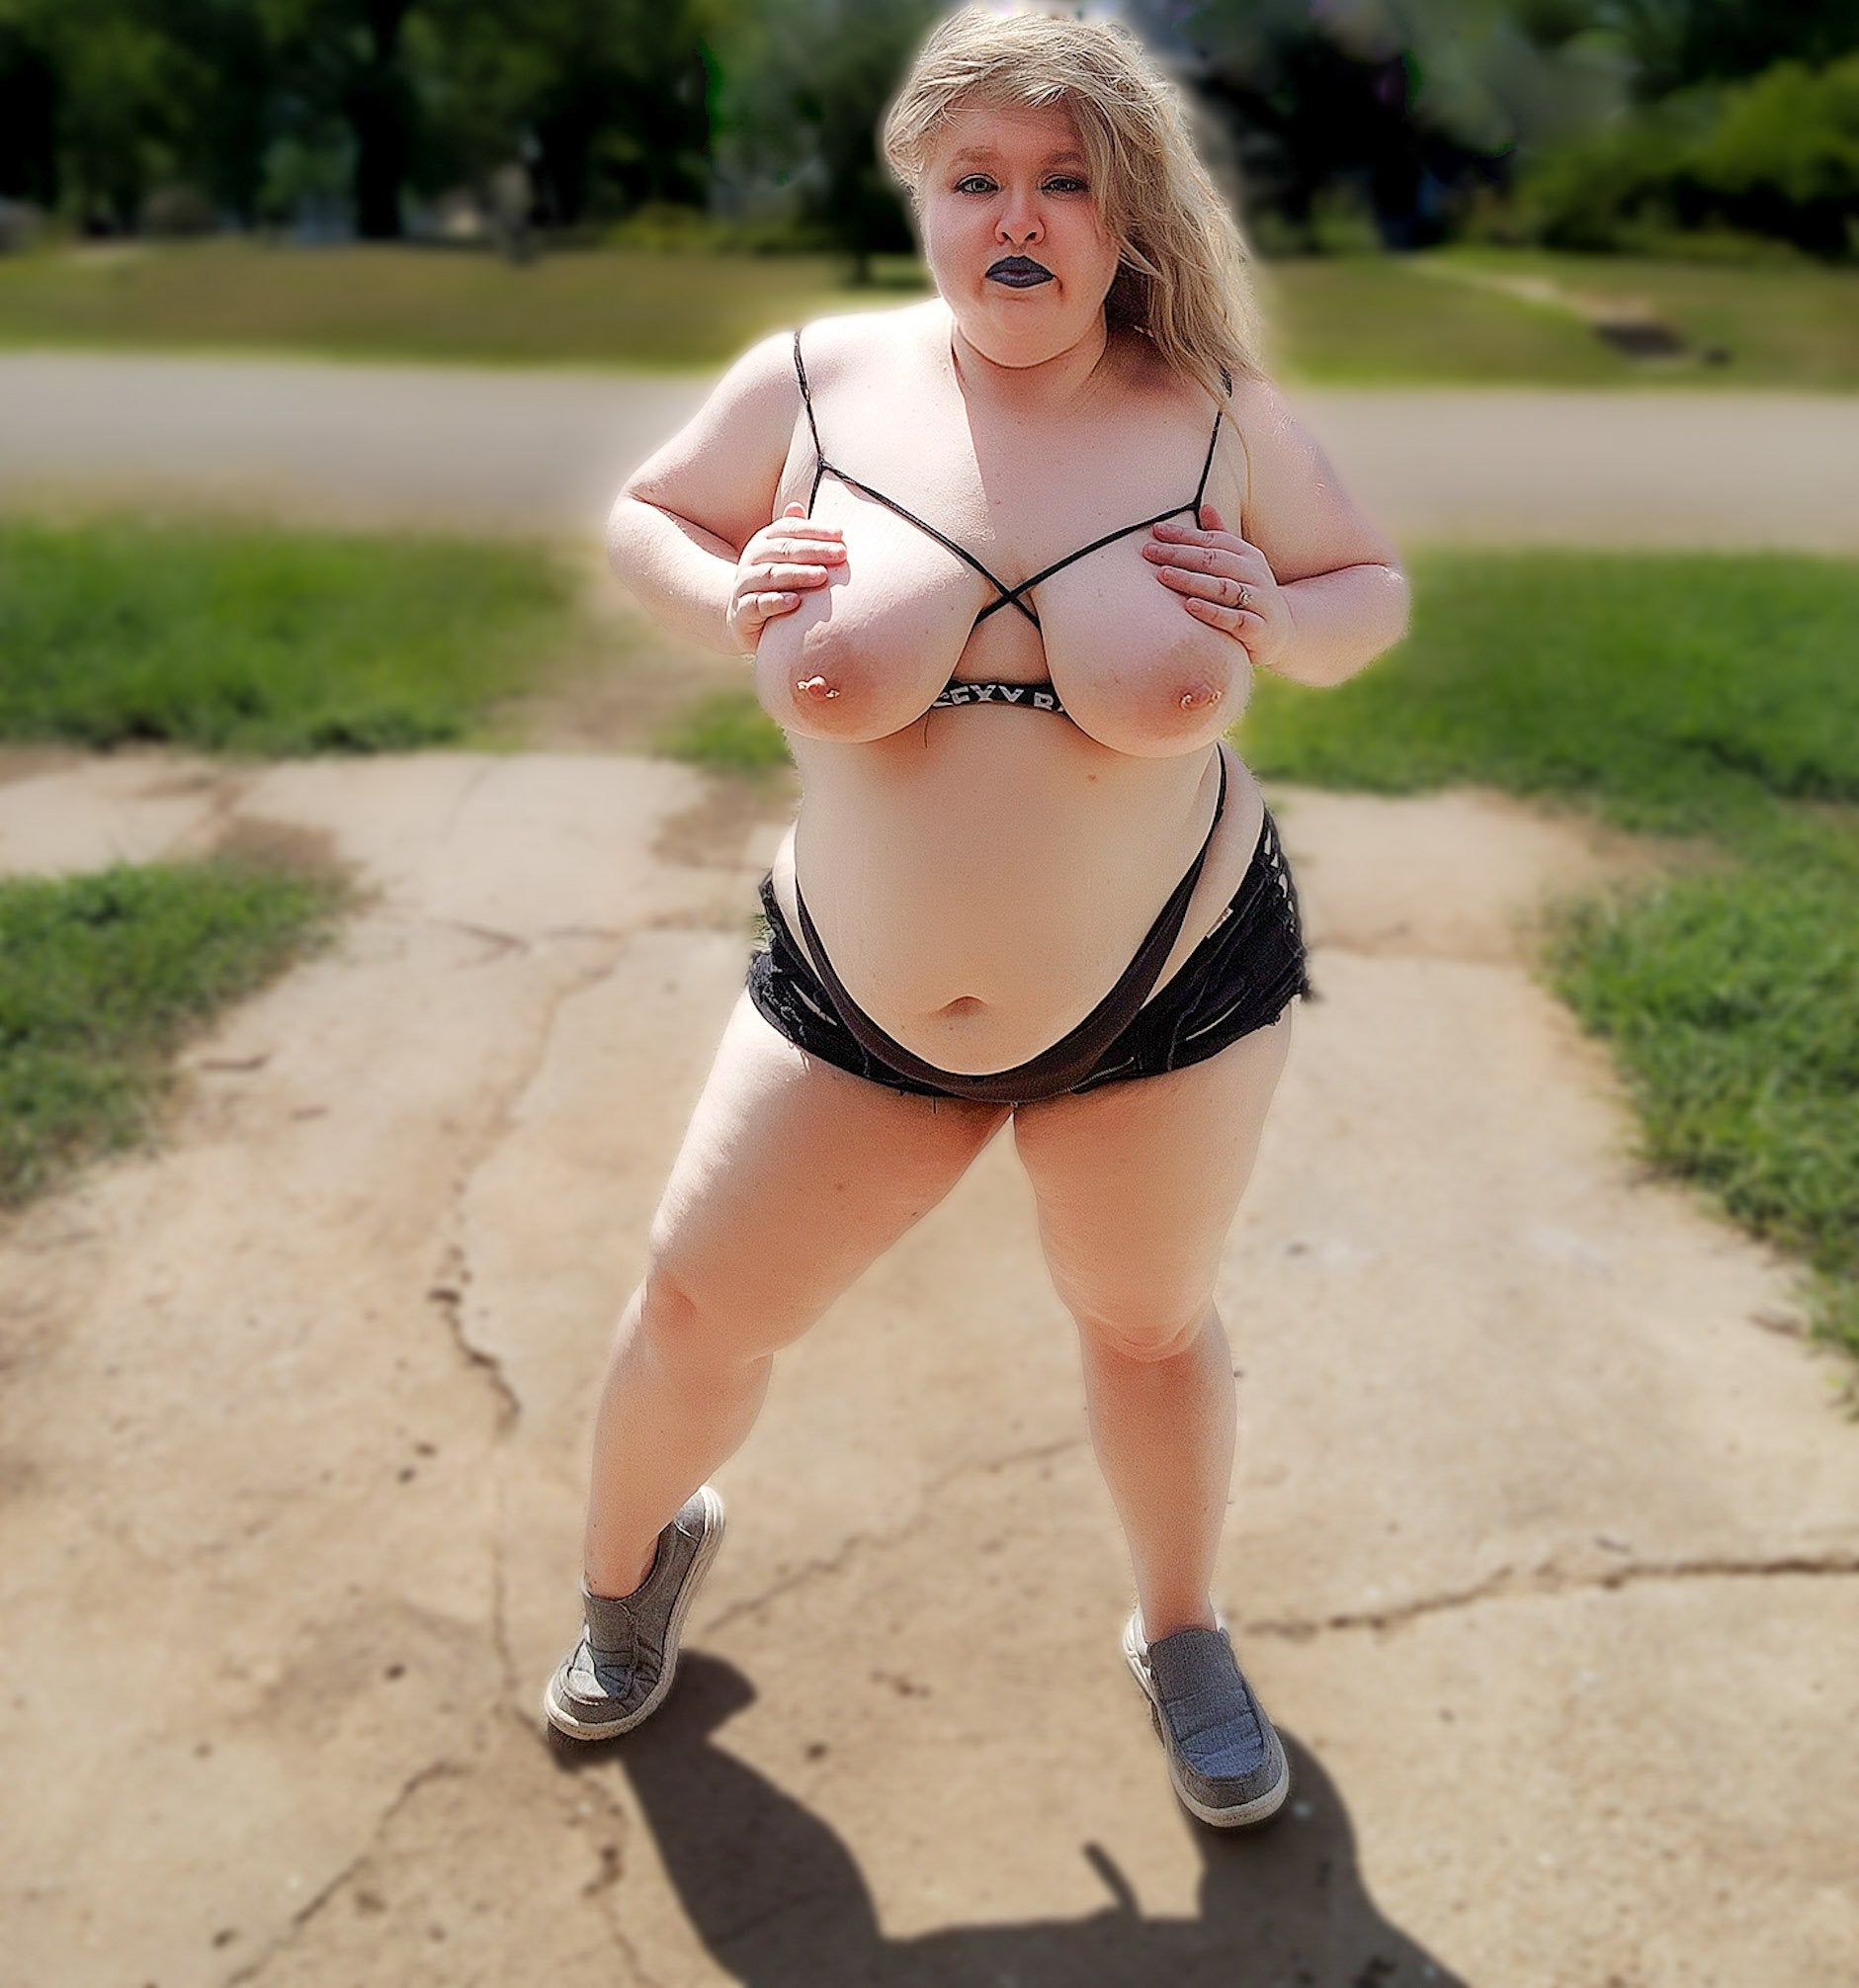 Had my titties out for photos outside today Thick